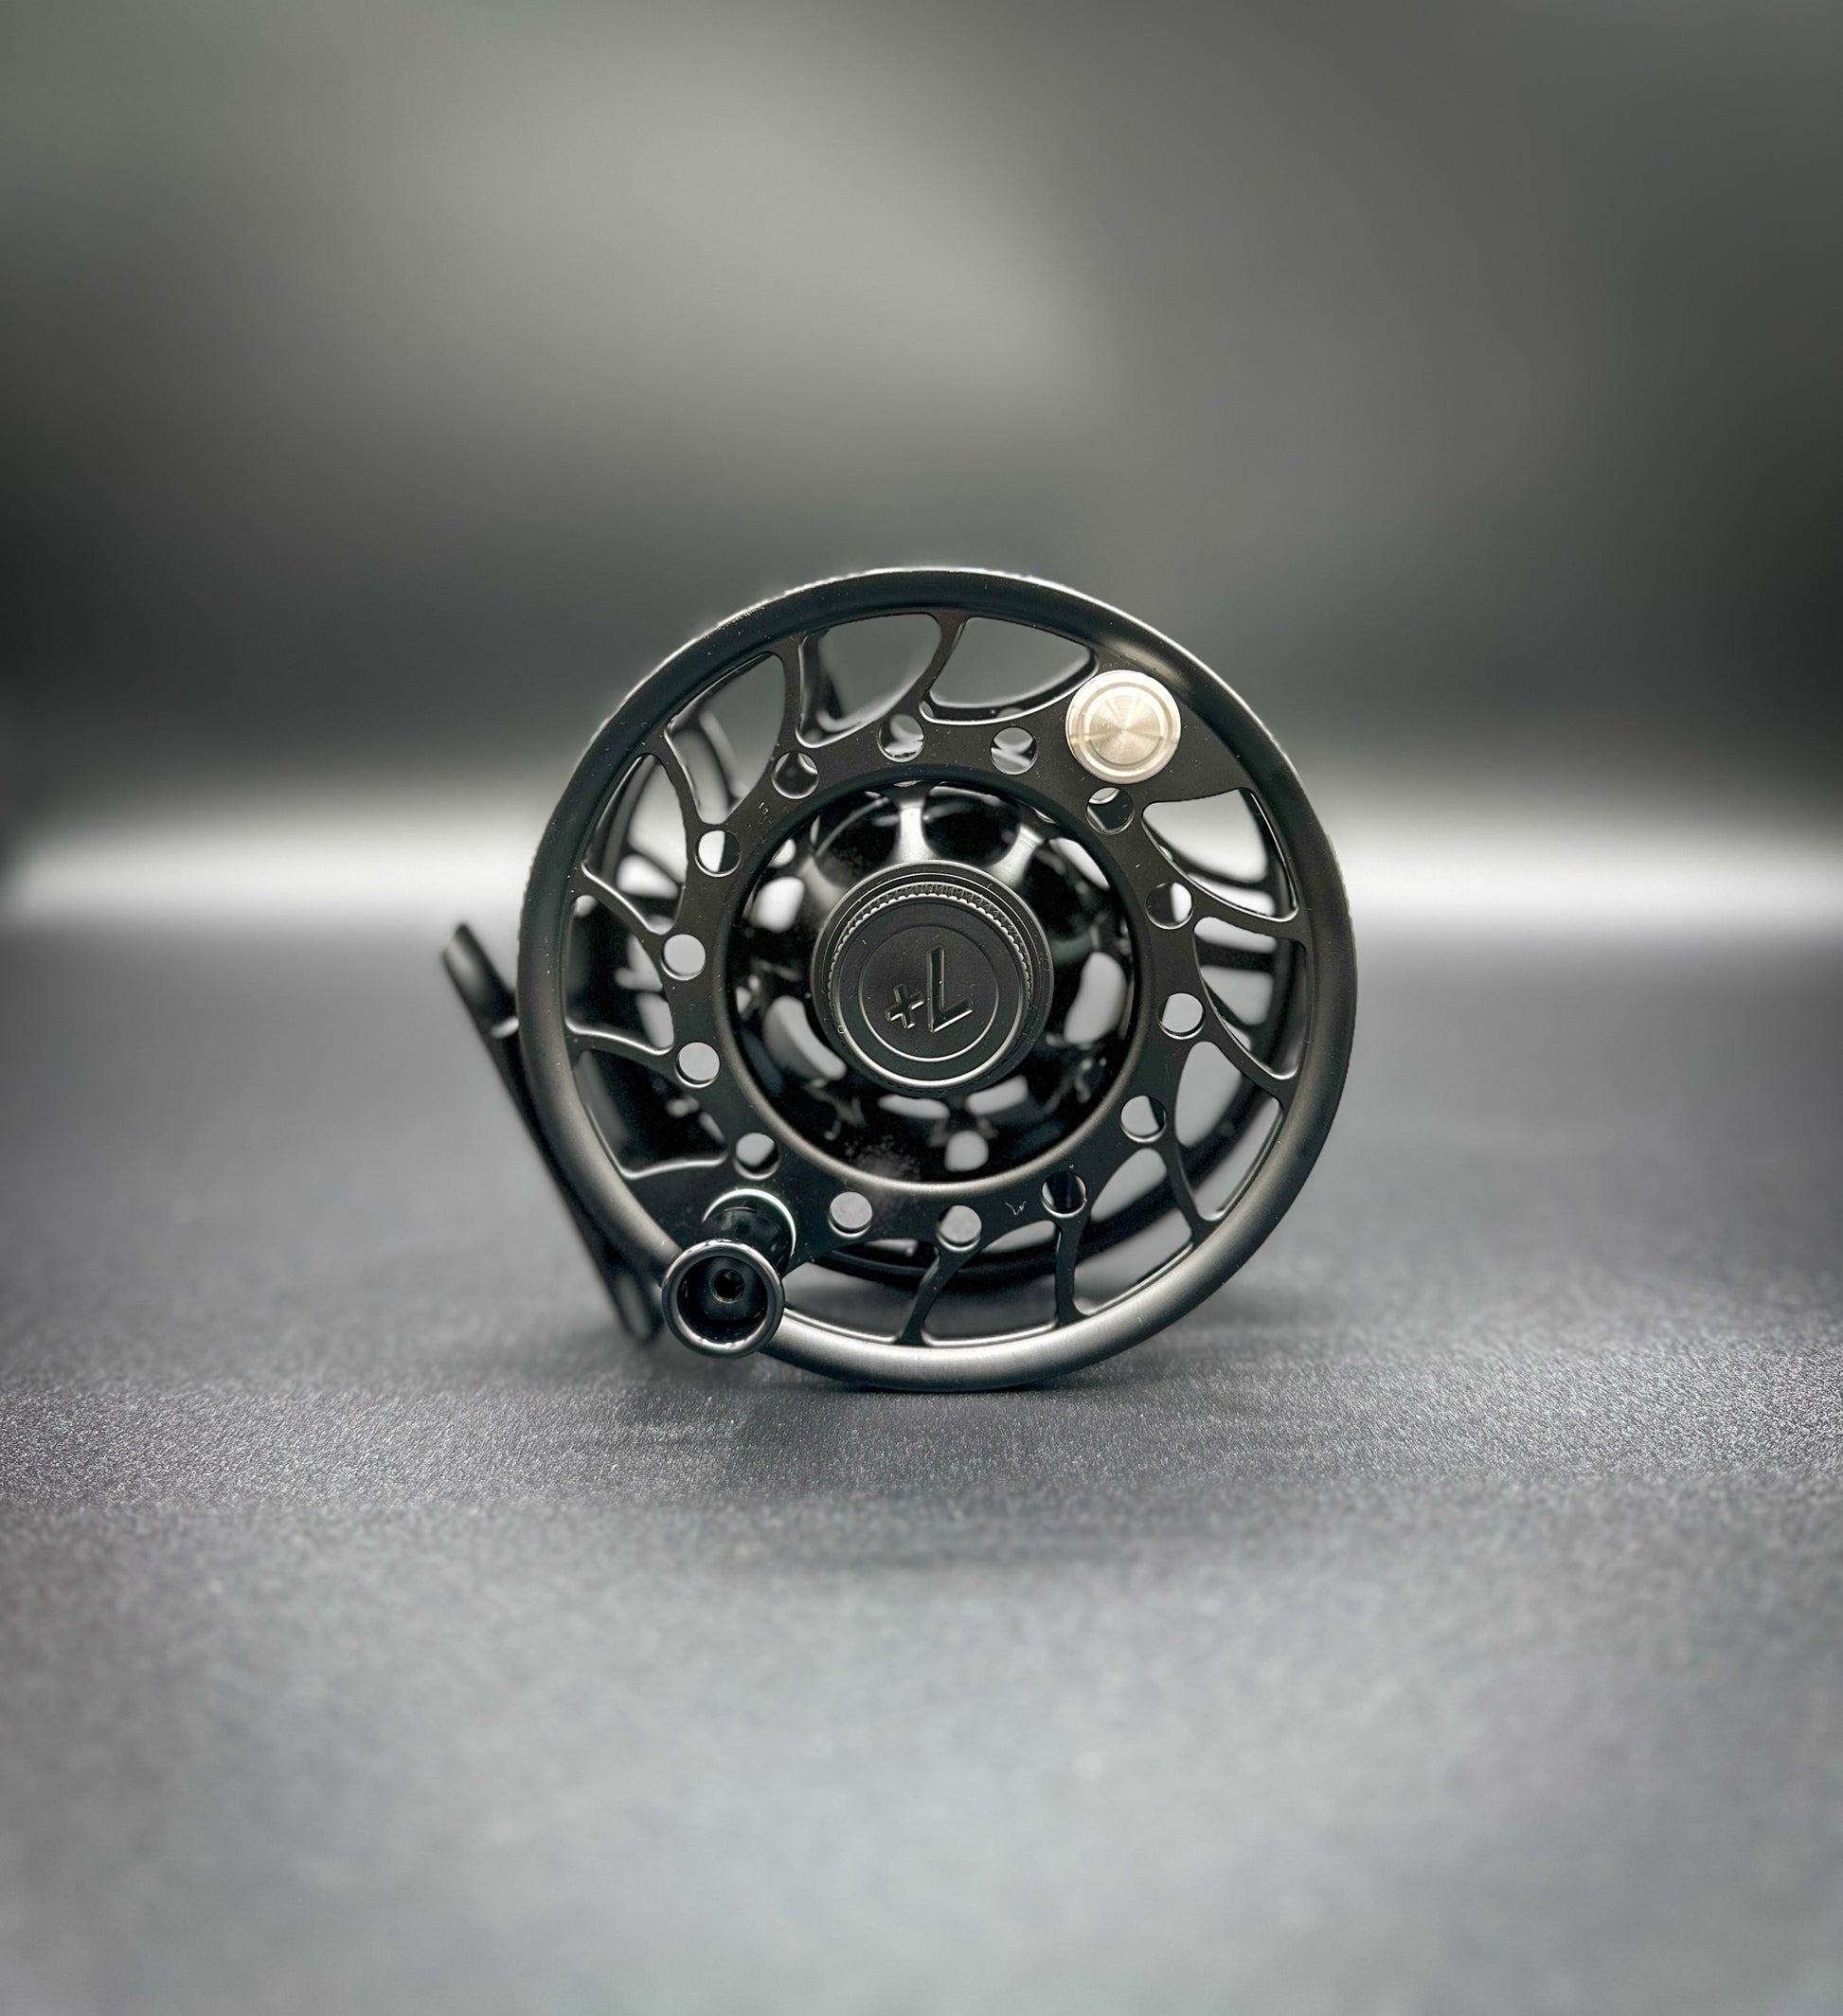 Hatch Iconic 7 Plus Fly Fishing Reel Product Details